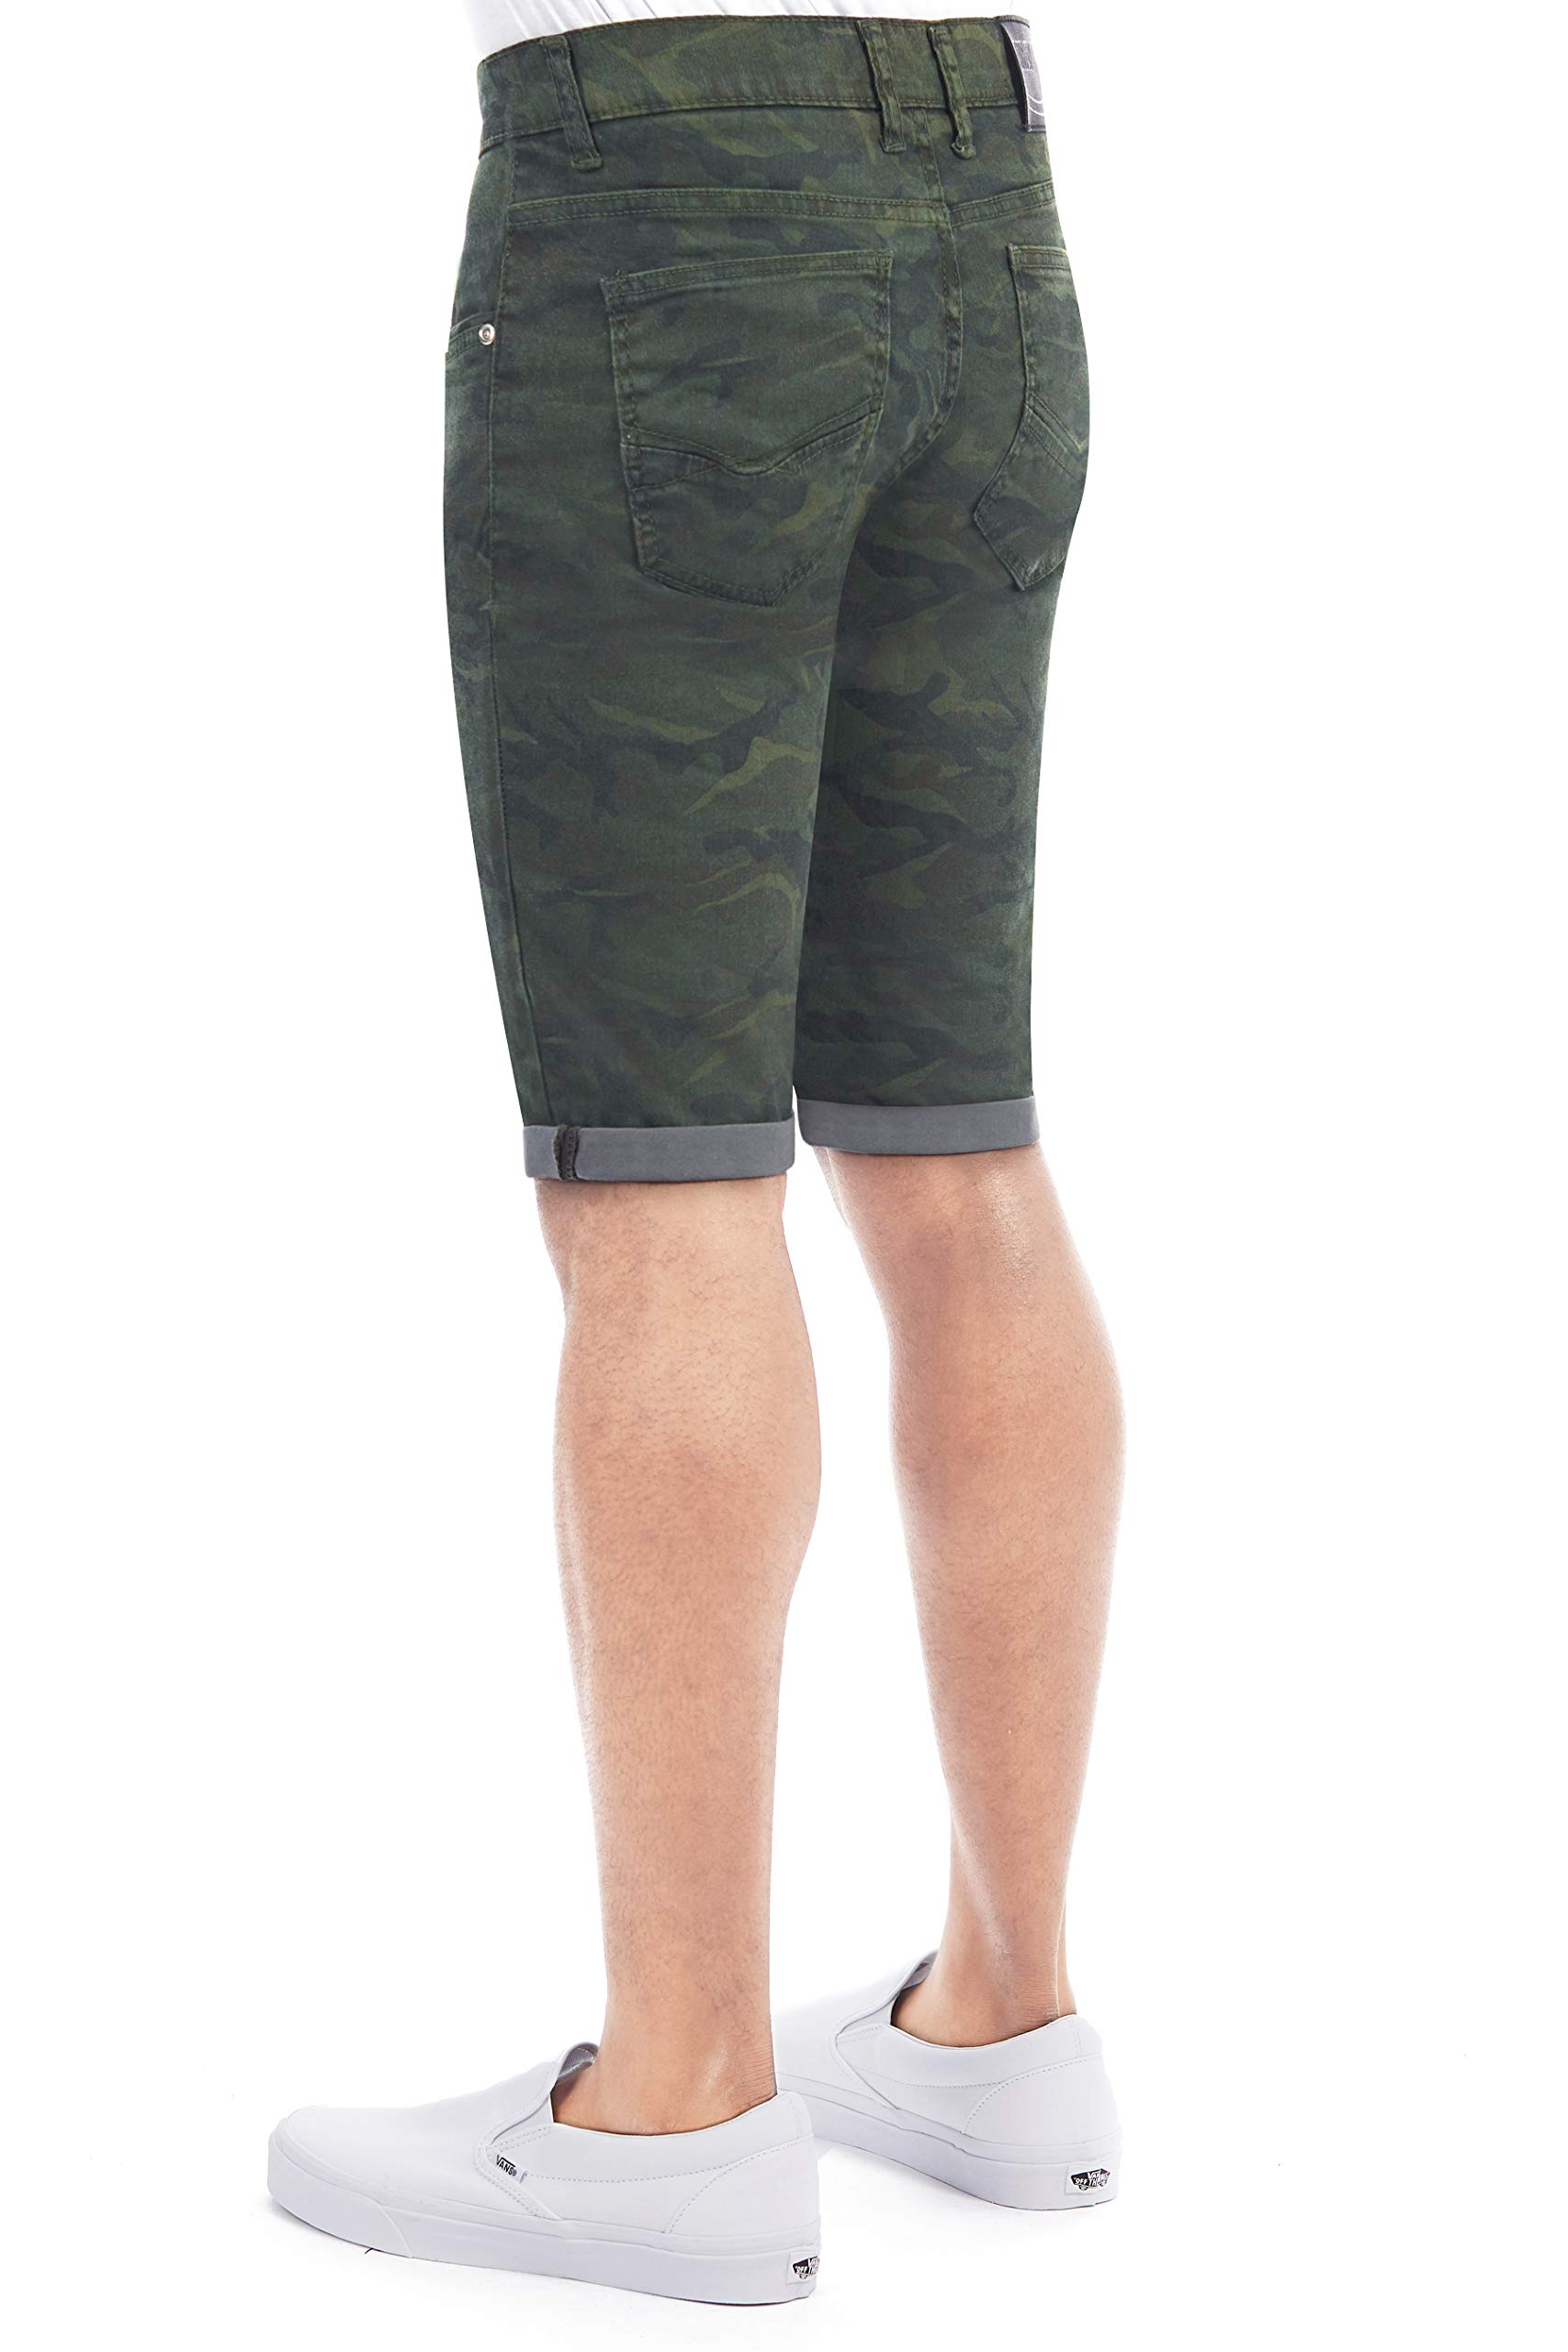 X RAY Men's Rolled Up Denim Shorts, Stretch Slim Skinny Fit, Distressed, Ripped, Bermuda Jeans Short, Olive Camo, Size 38 - image 5 of 6